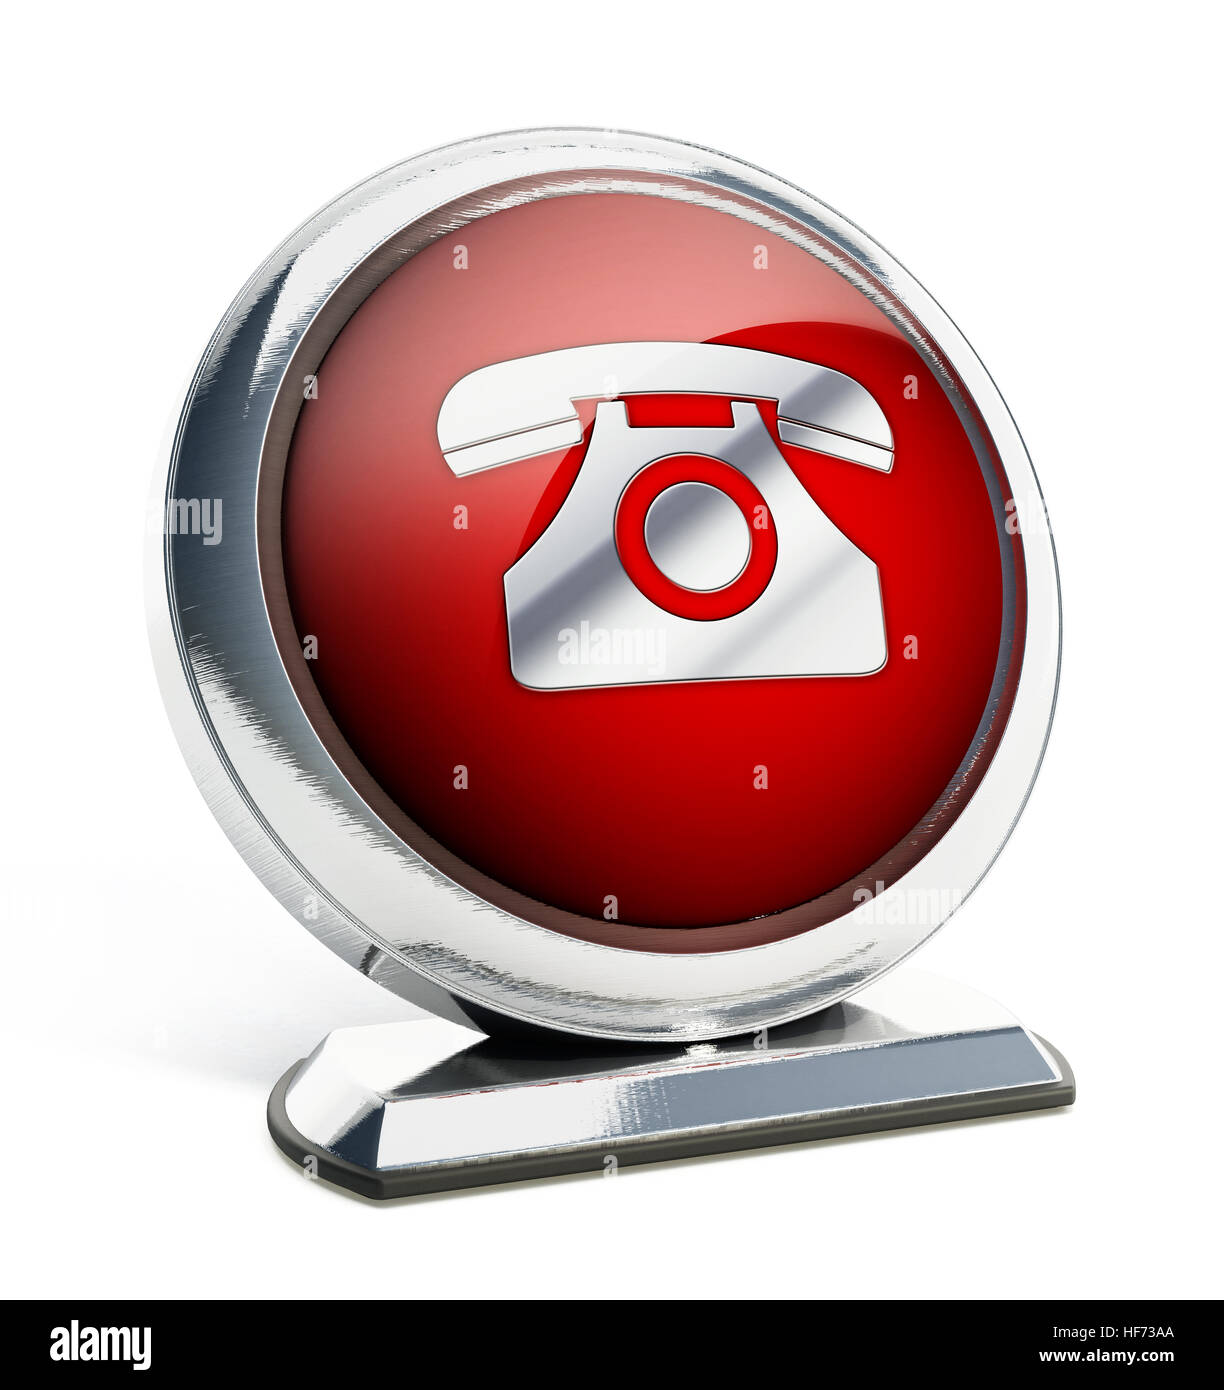 Glossy red button with phone symbol. 3D illustration. Stock Photo